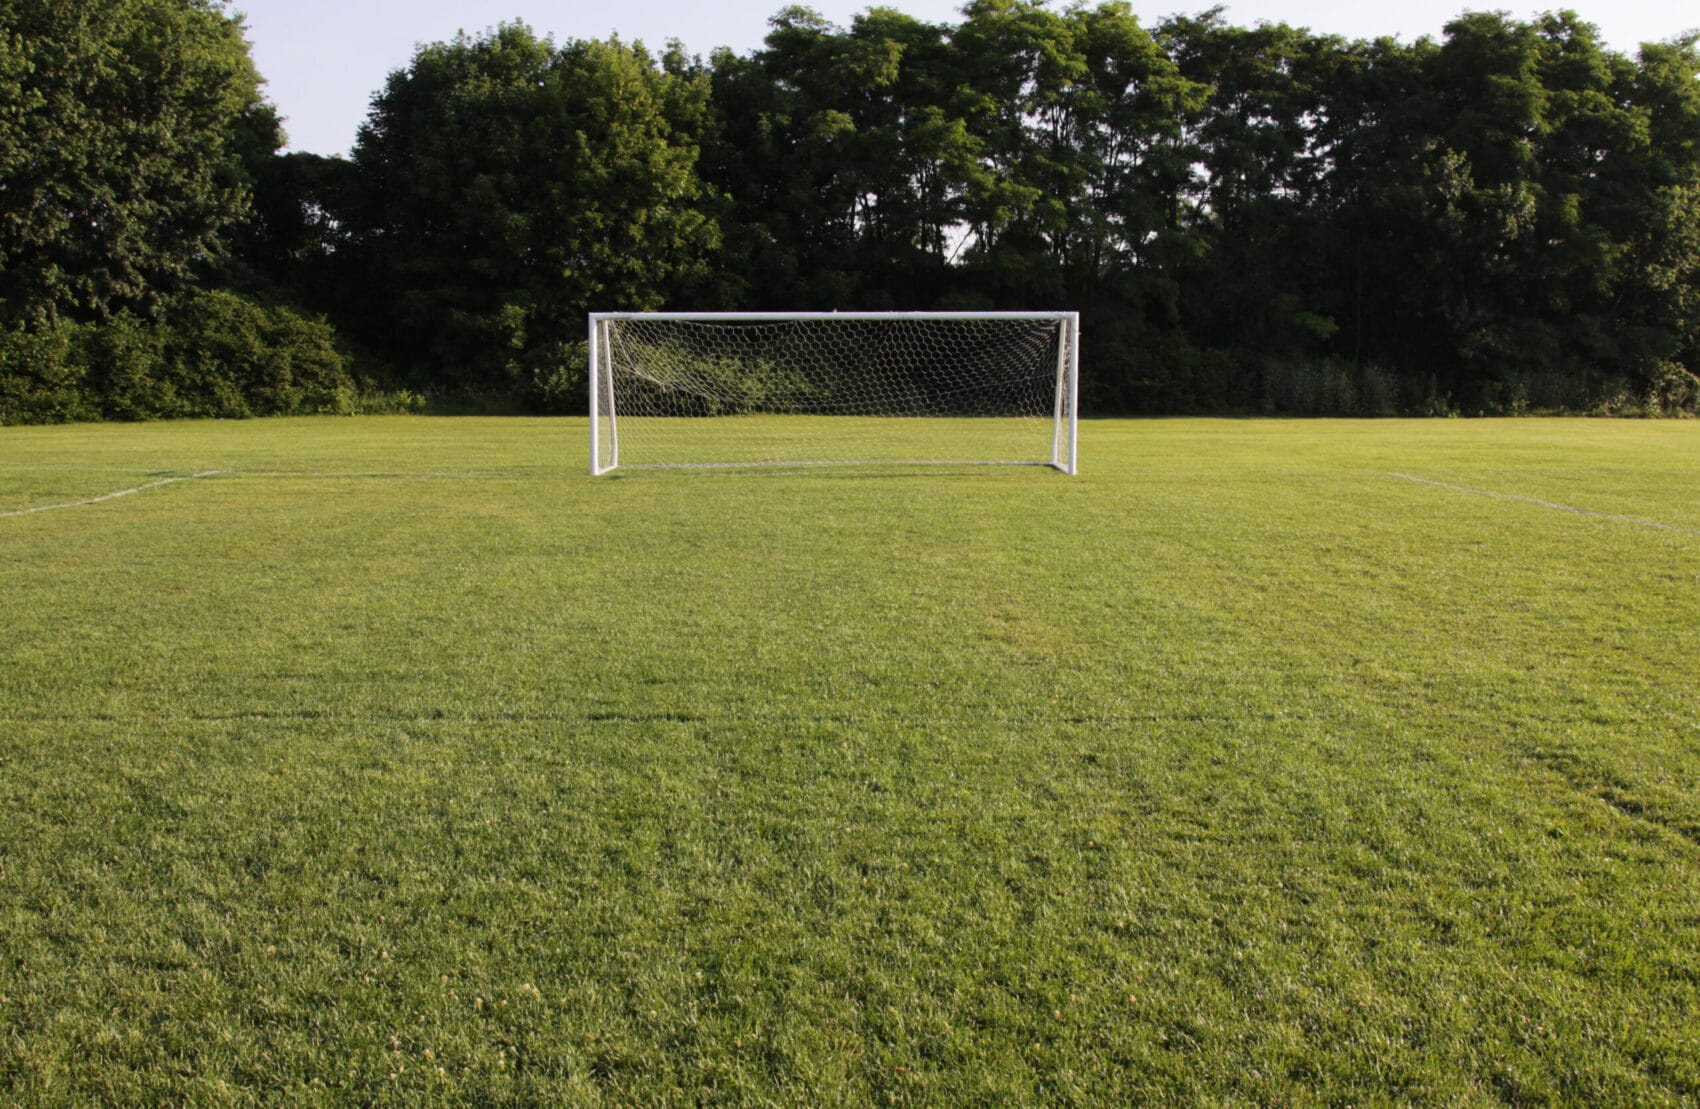 A soccer net with shot in bright sunlight with trees in the background.